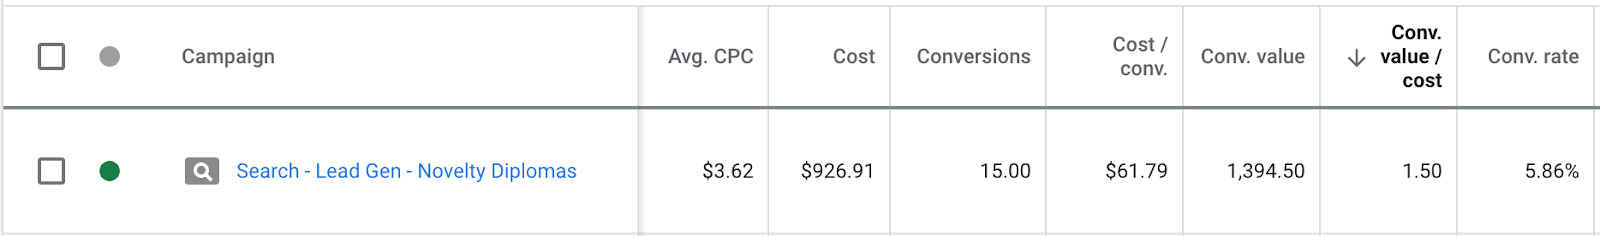 Additional information about the client's conversion rate after one month of using HOTH PPC.